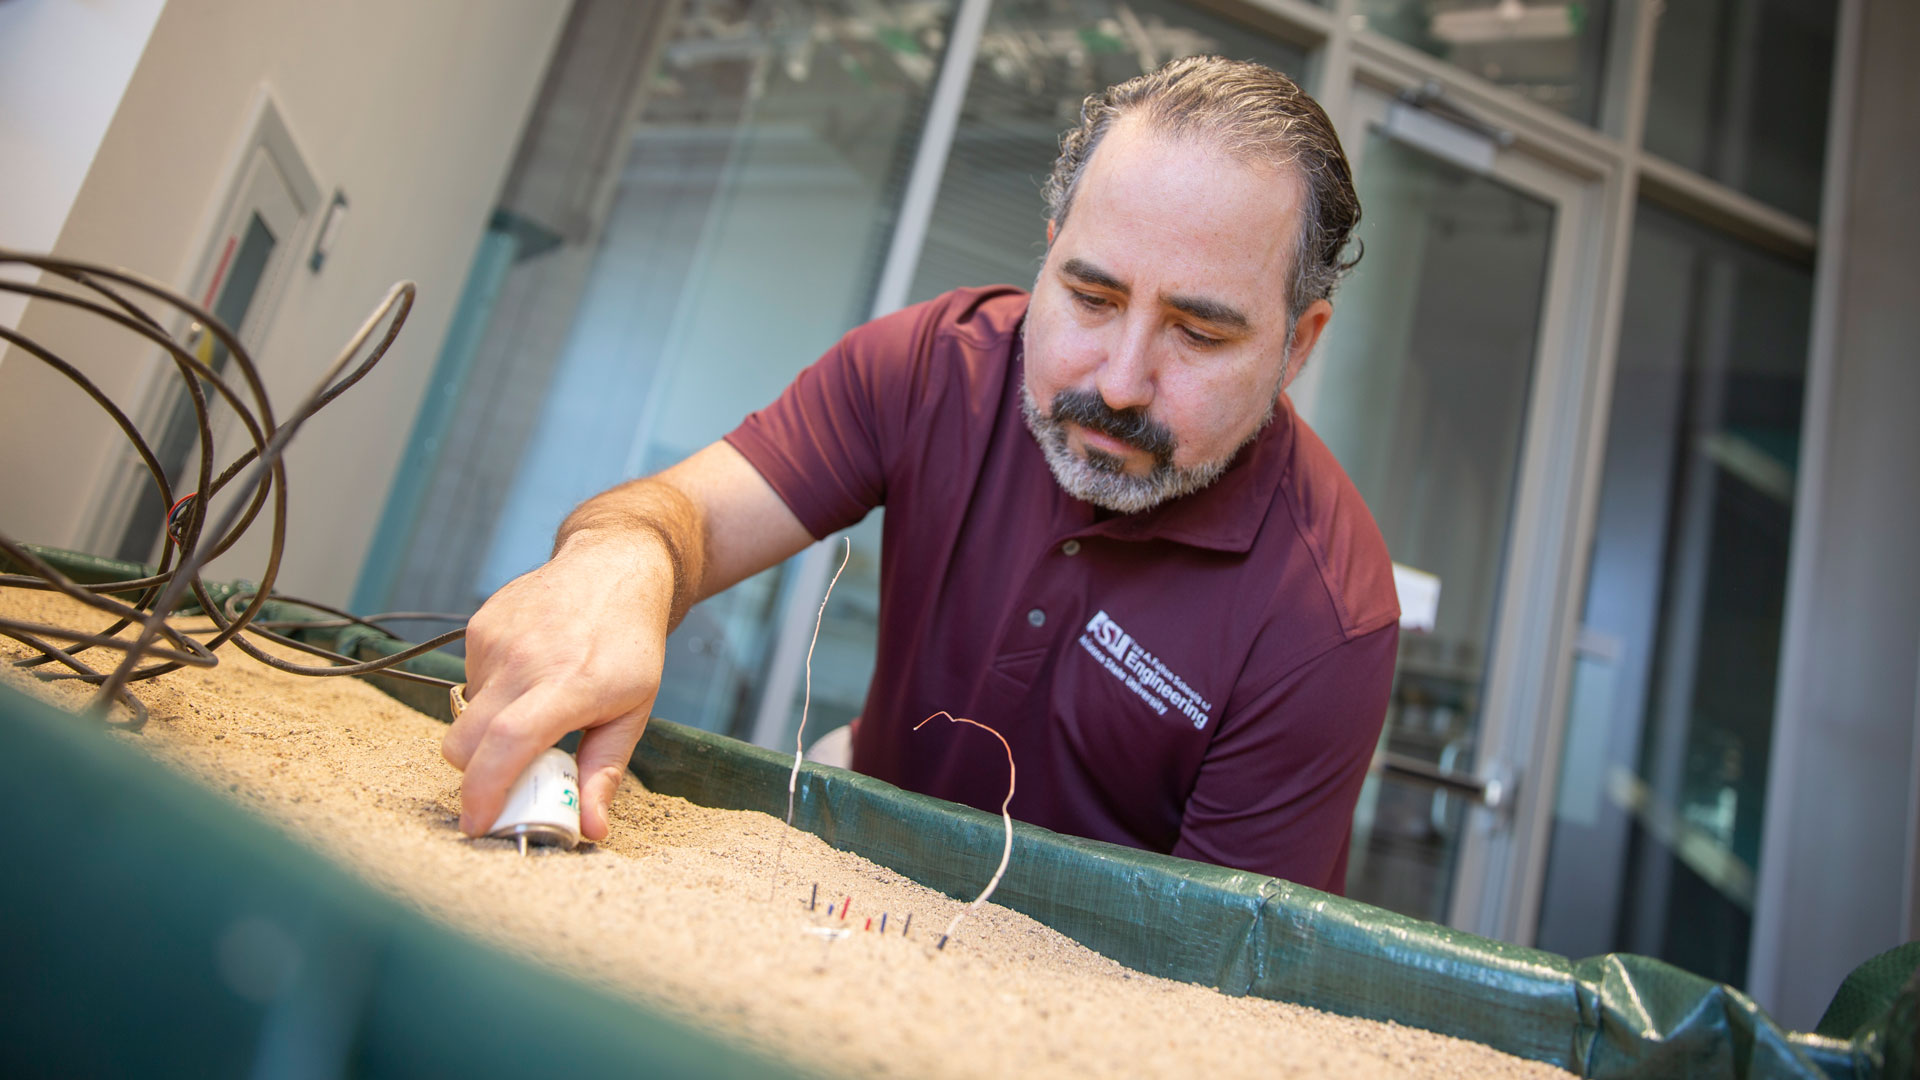 ASU researcher Enrique Vivoni works with a sensor and container of sand in the Hydrology Research Lab.